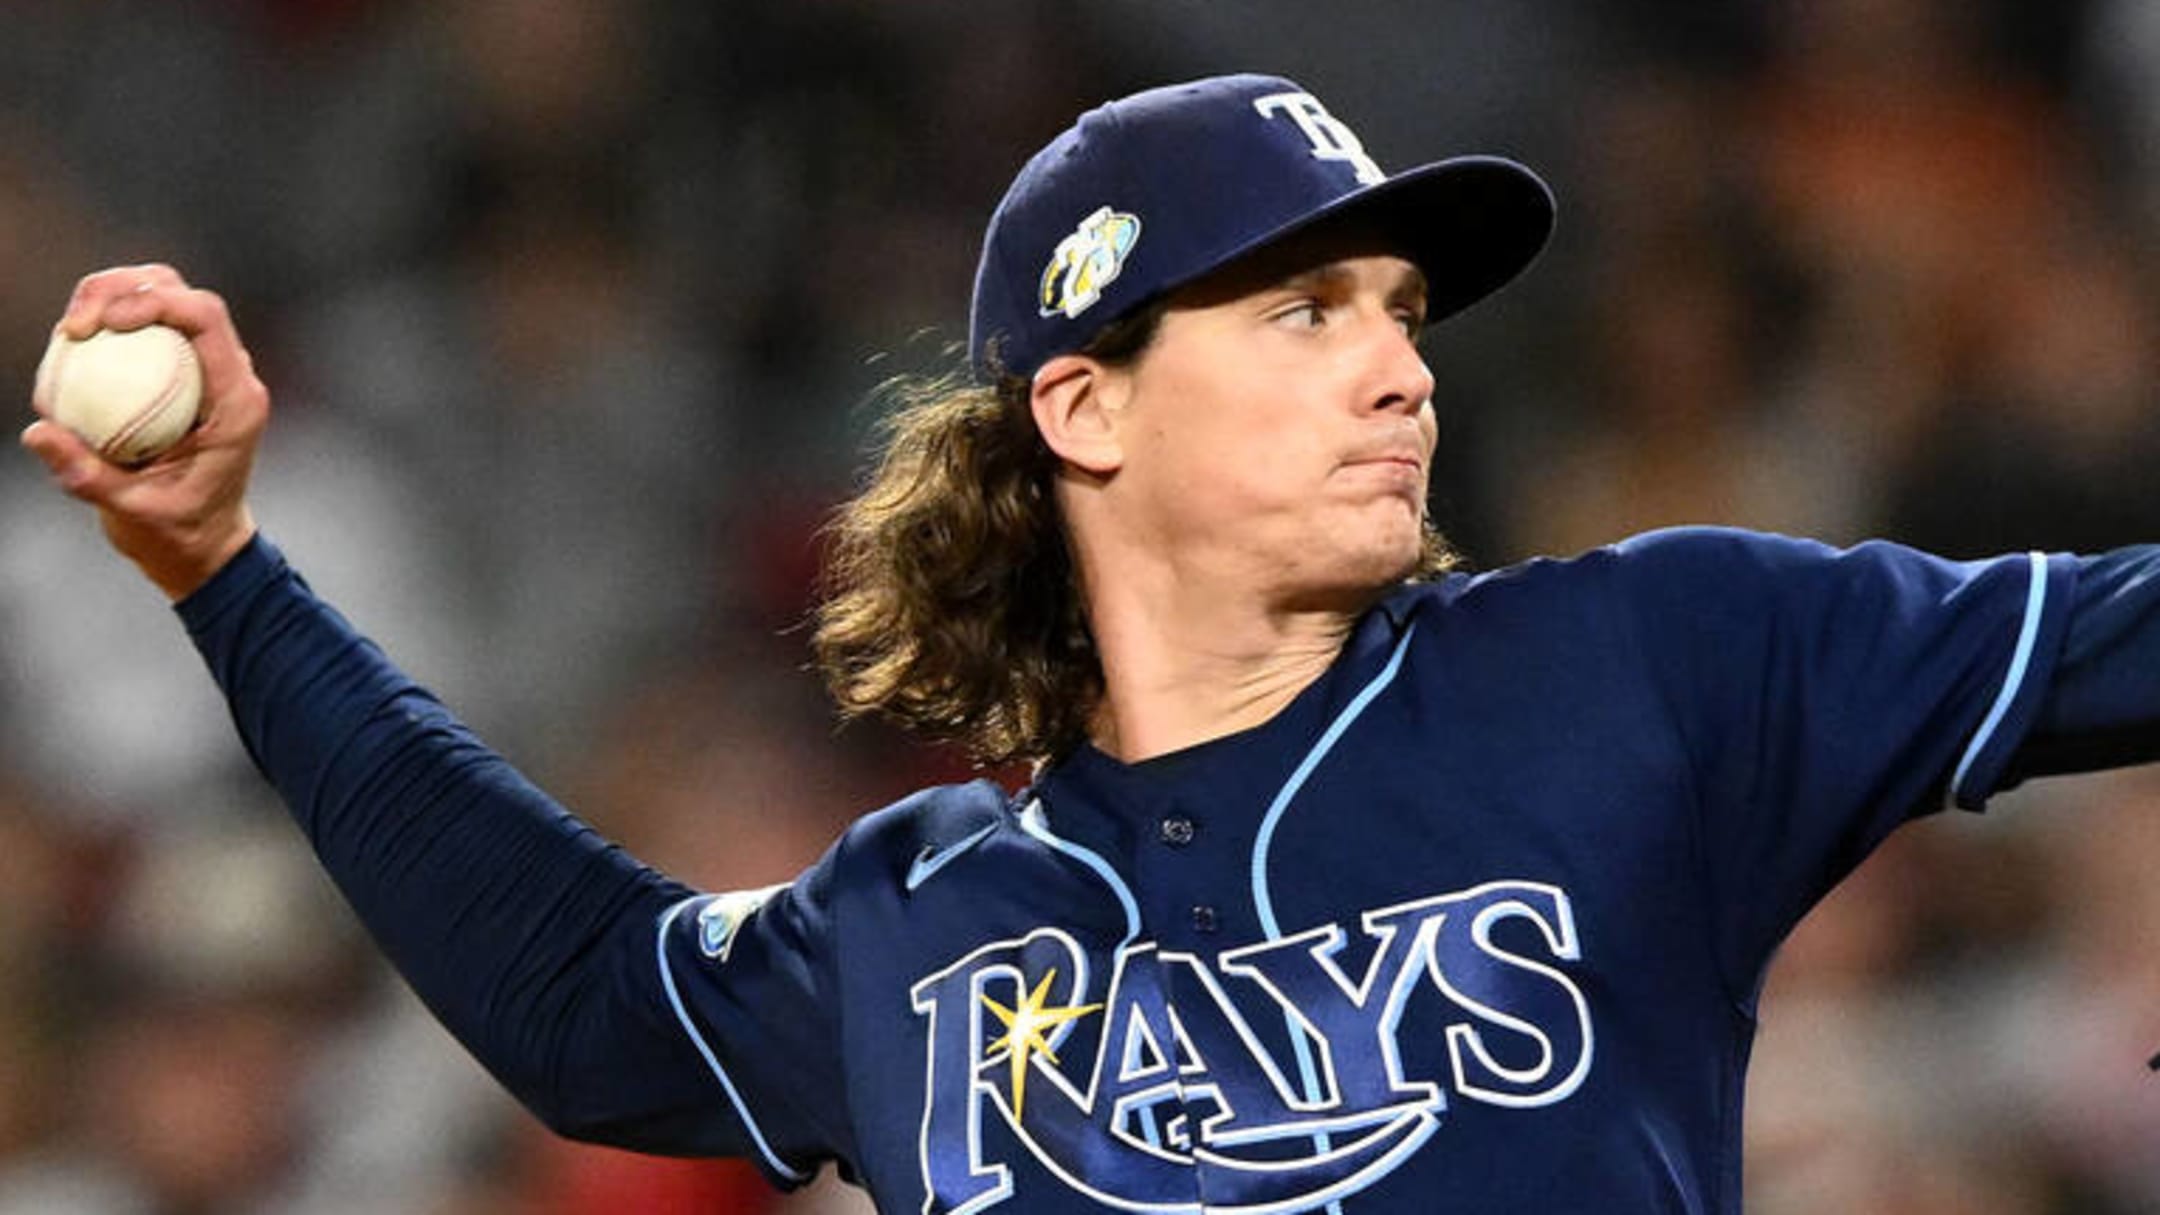 The Ex-Rays: Tampa Bay gets OK from MLB to explore Montreal